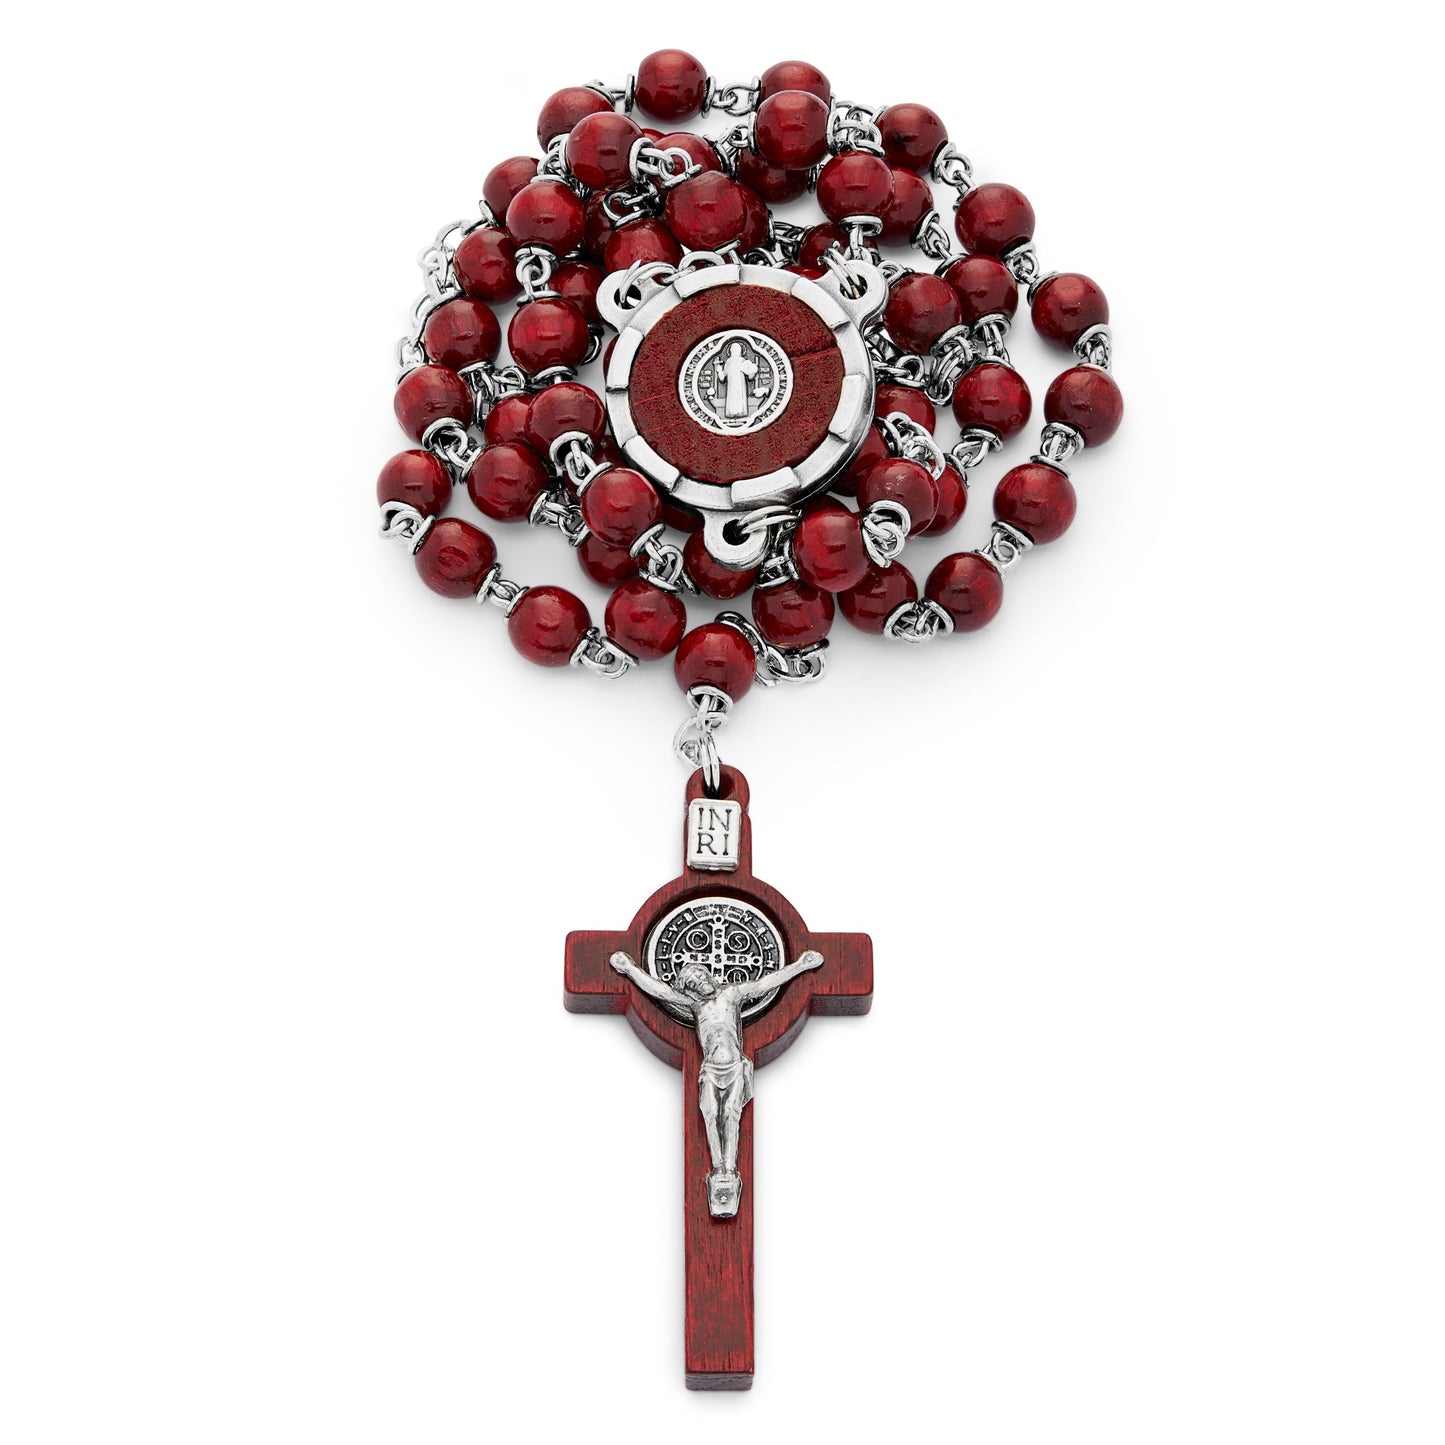 MONDO CATTOLICO Prayer Beads 49 cm (19.29 in) / 6 mm (0.23 in) Saint Benedict Red Wooden Rosary